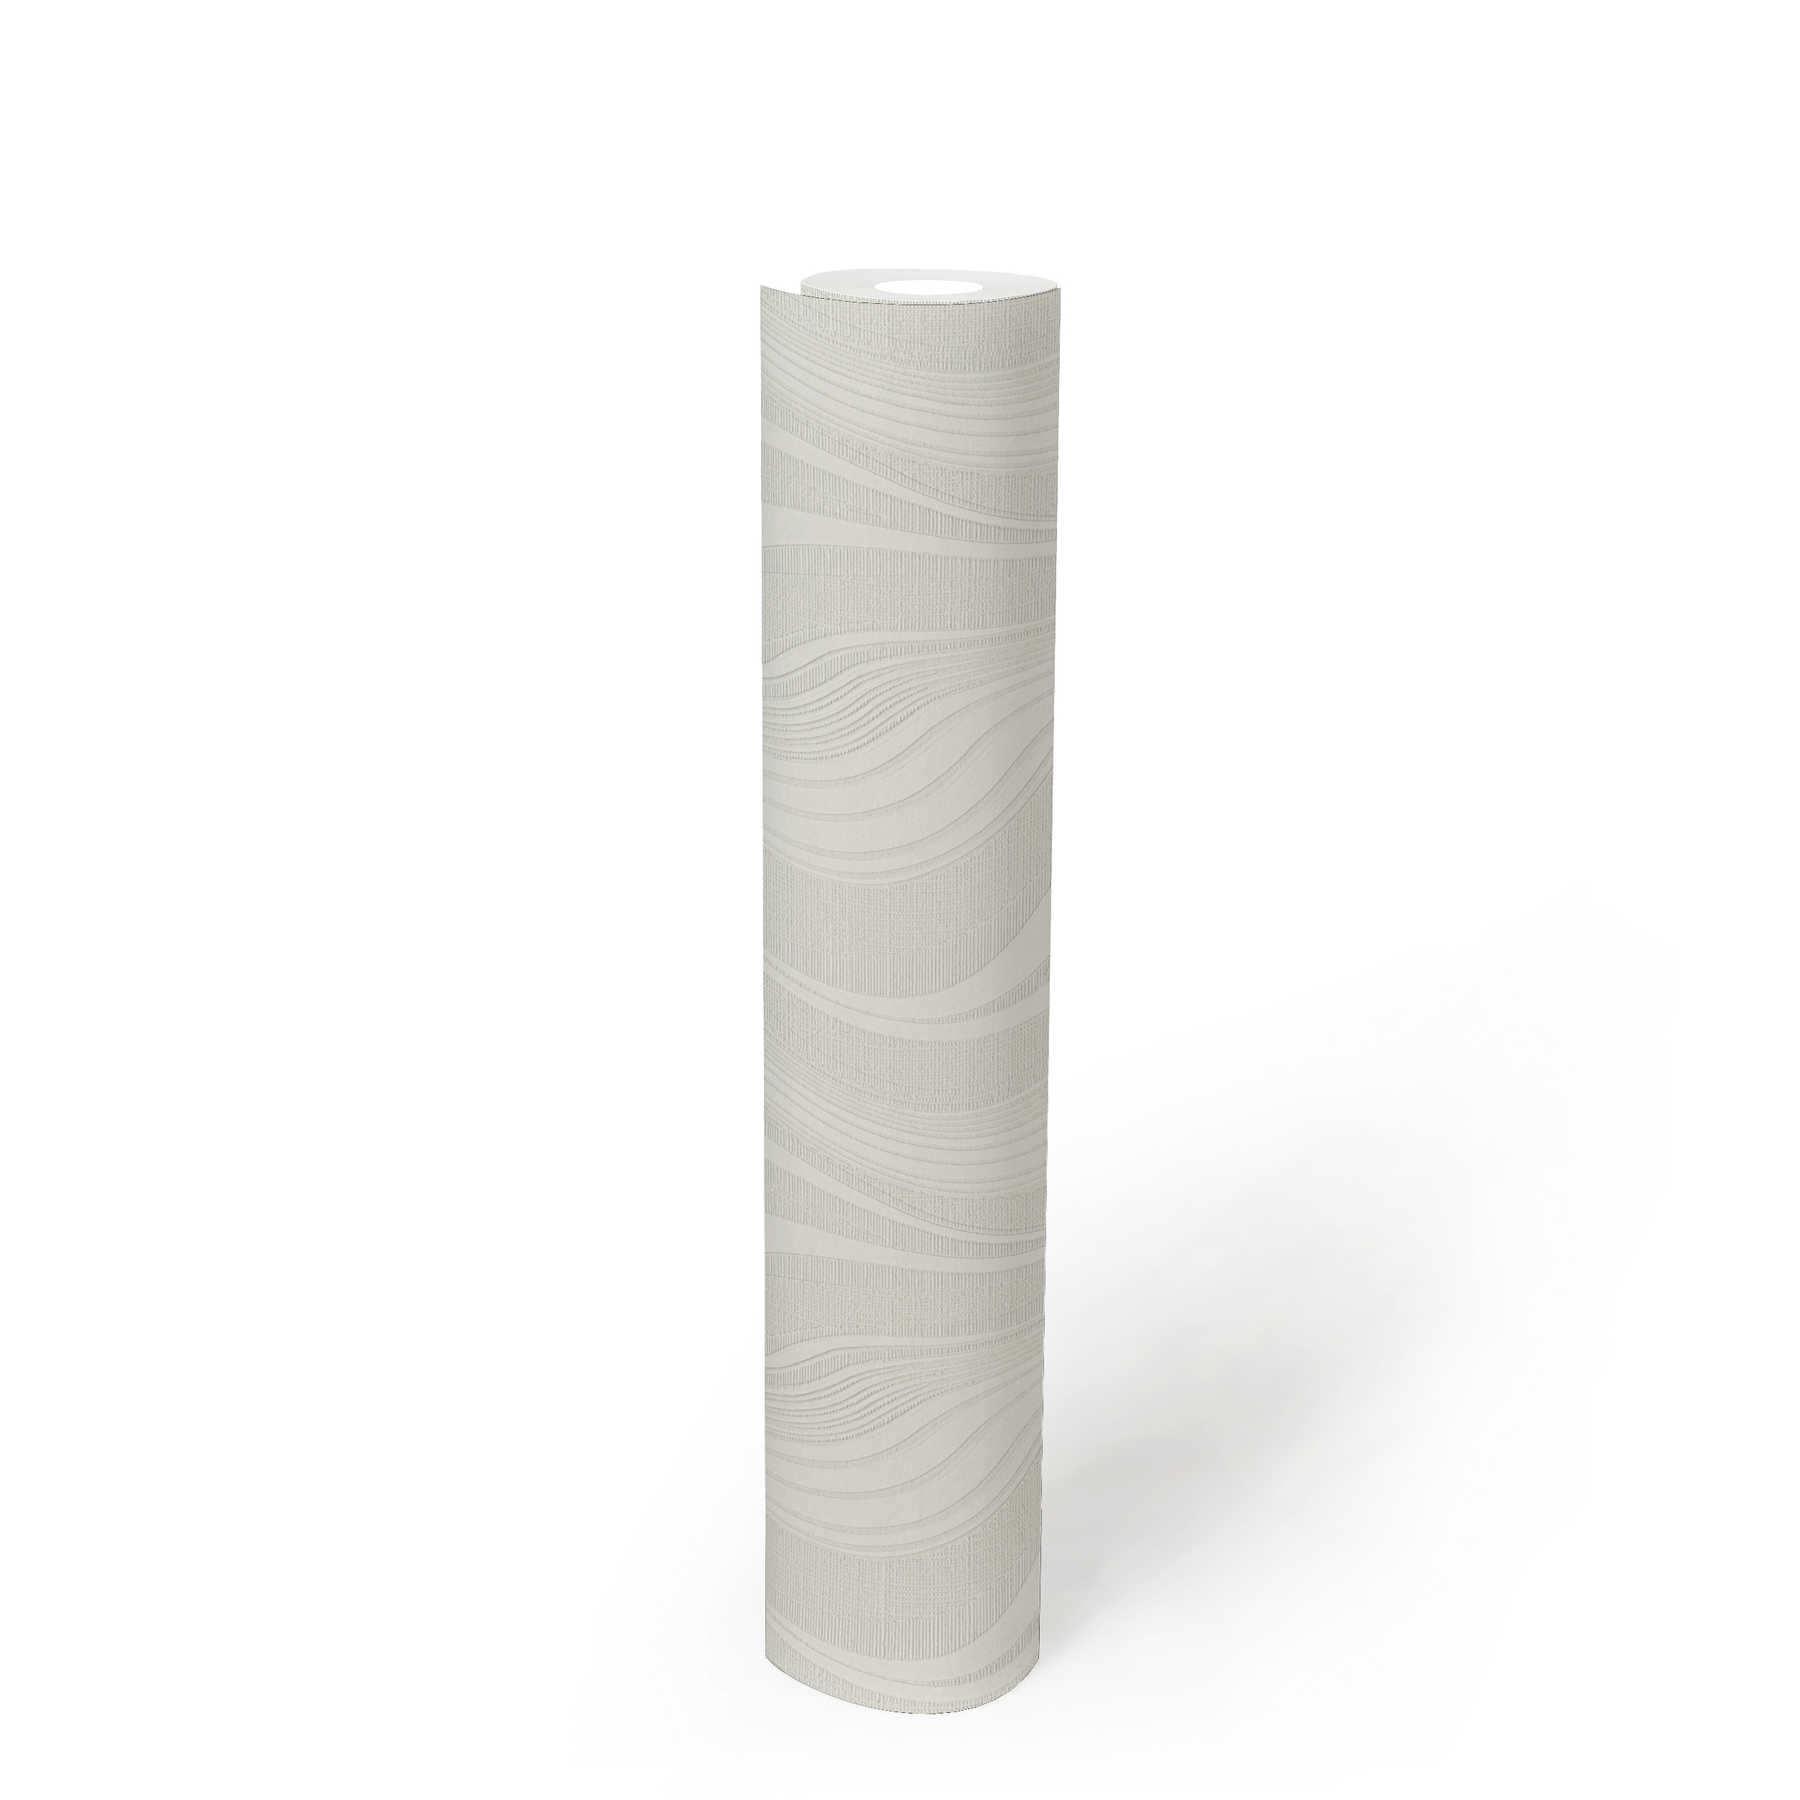             Wallpaper with organic line pattern and 3D effect - white
        